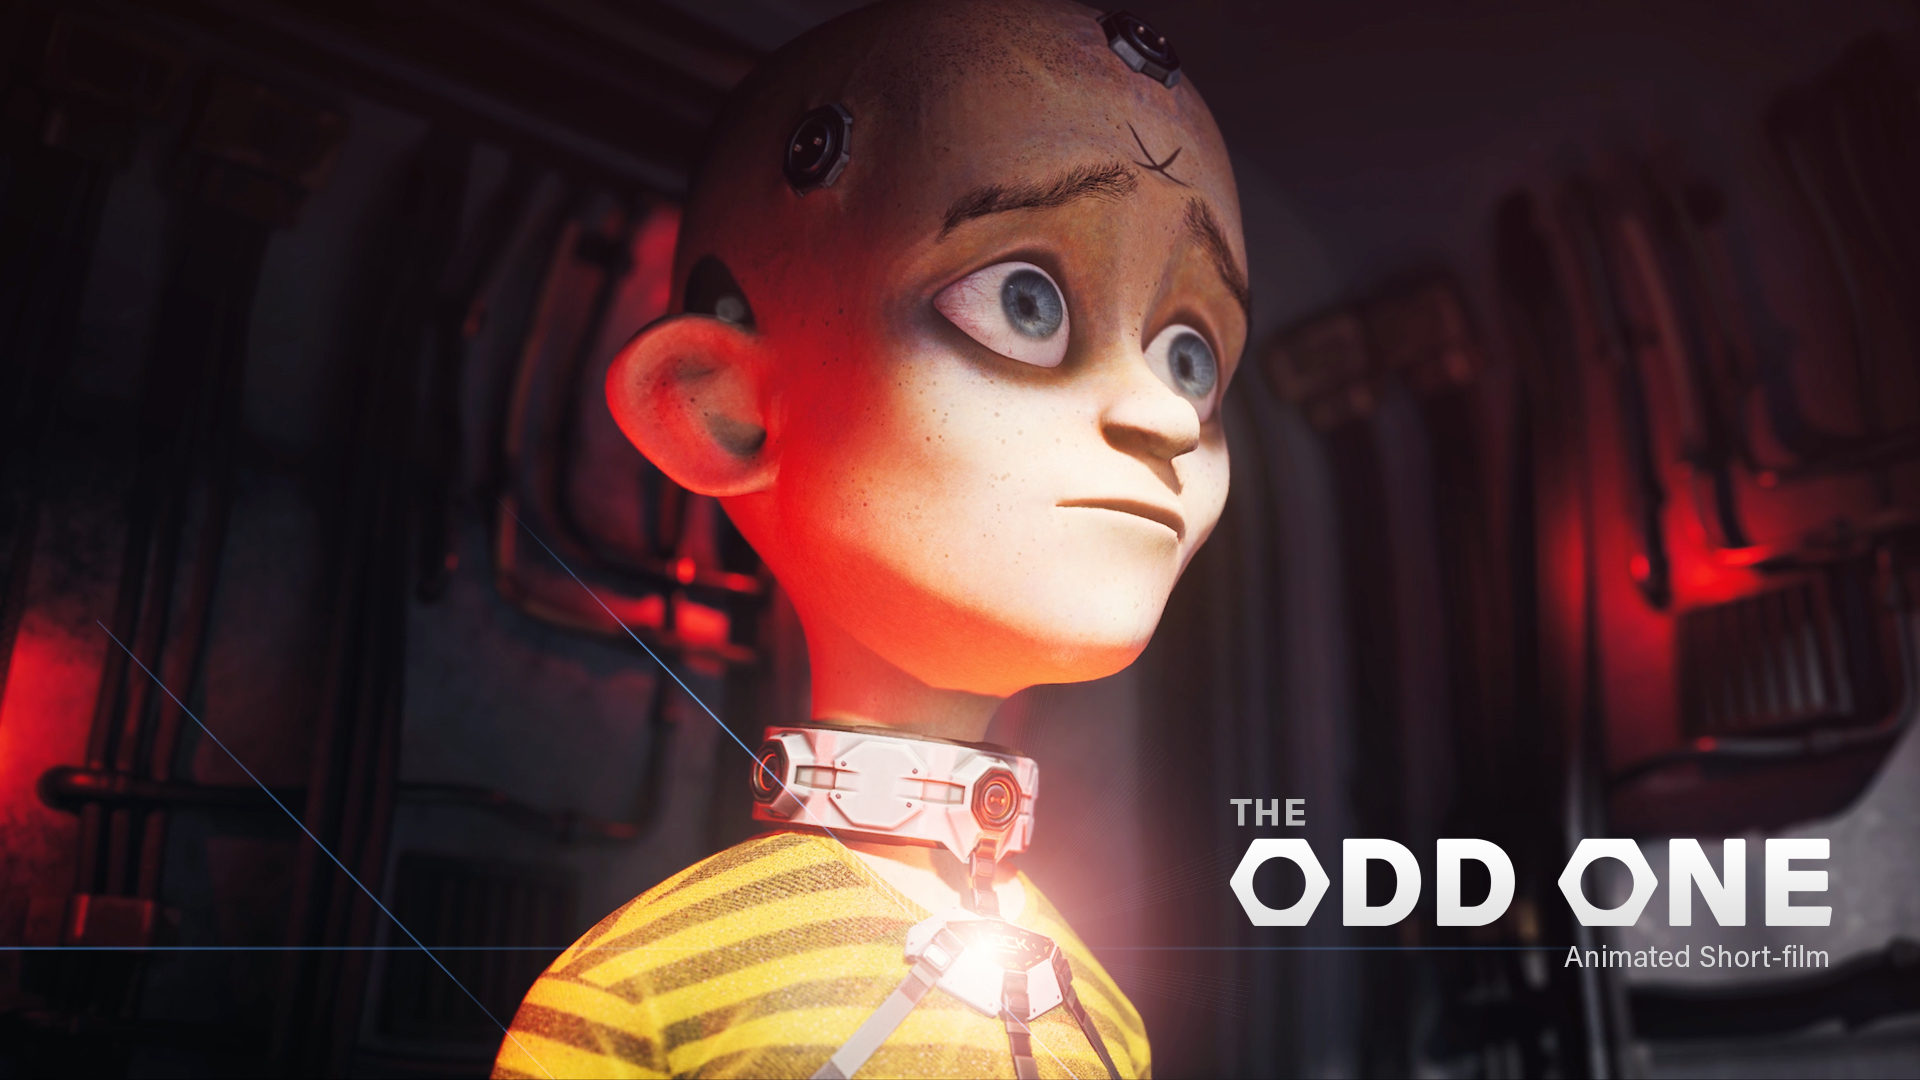 CGMEETUP - The Odd One : An animated short by Clemhyn Escosora